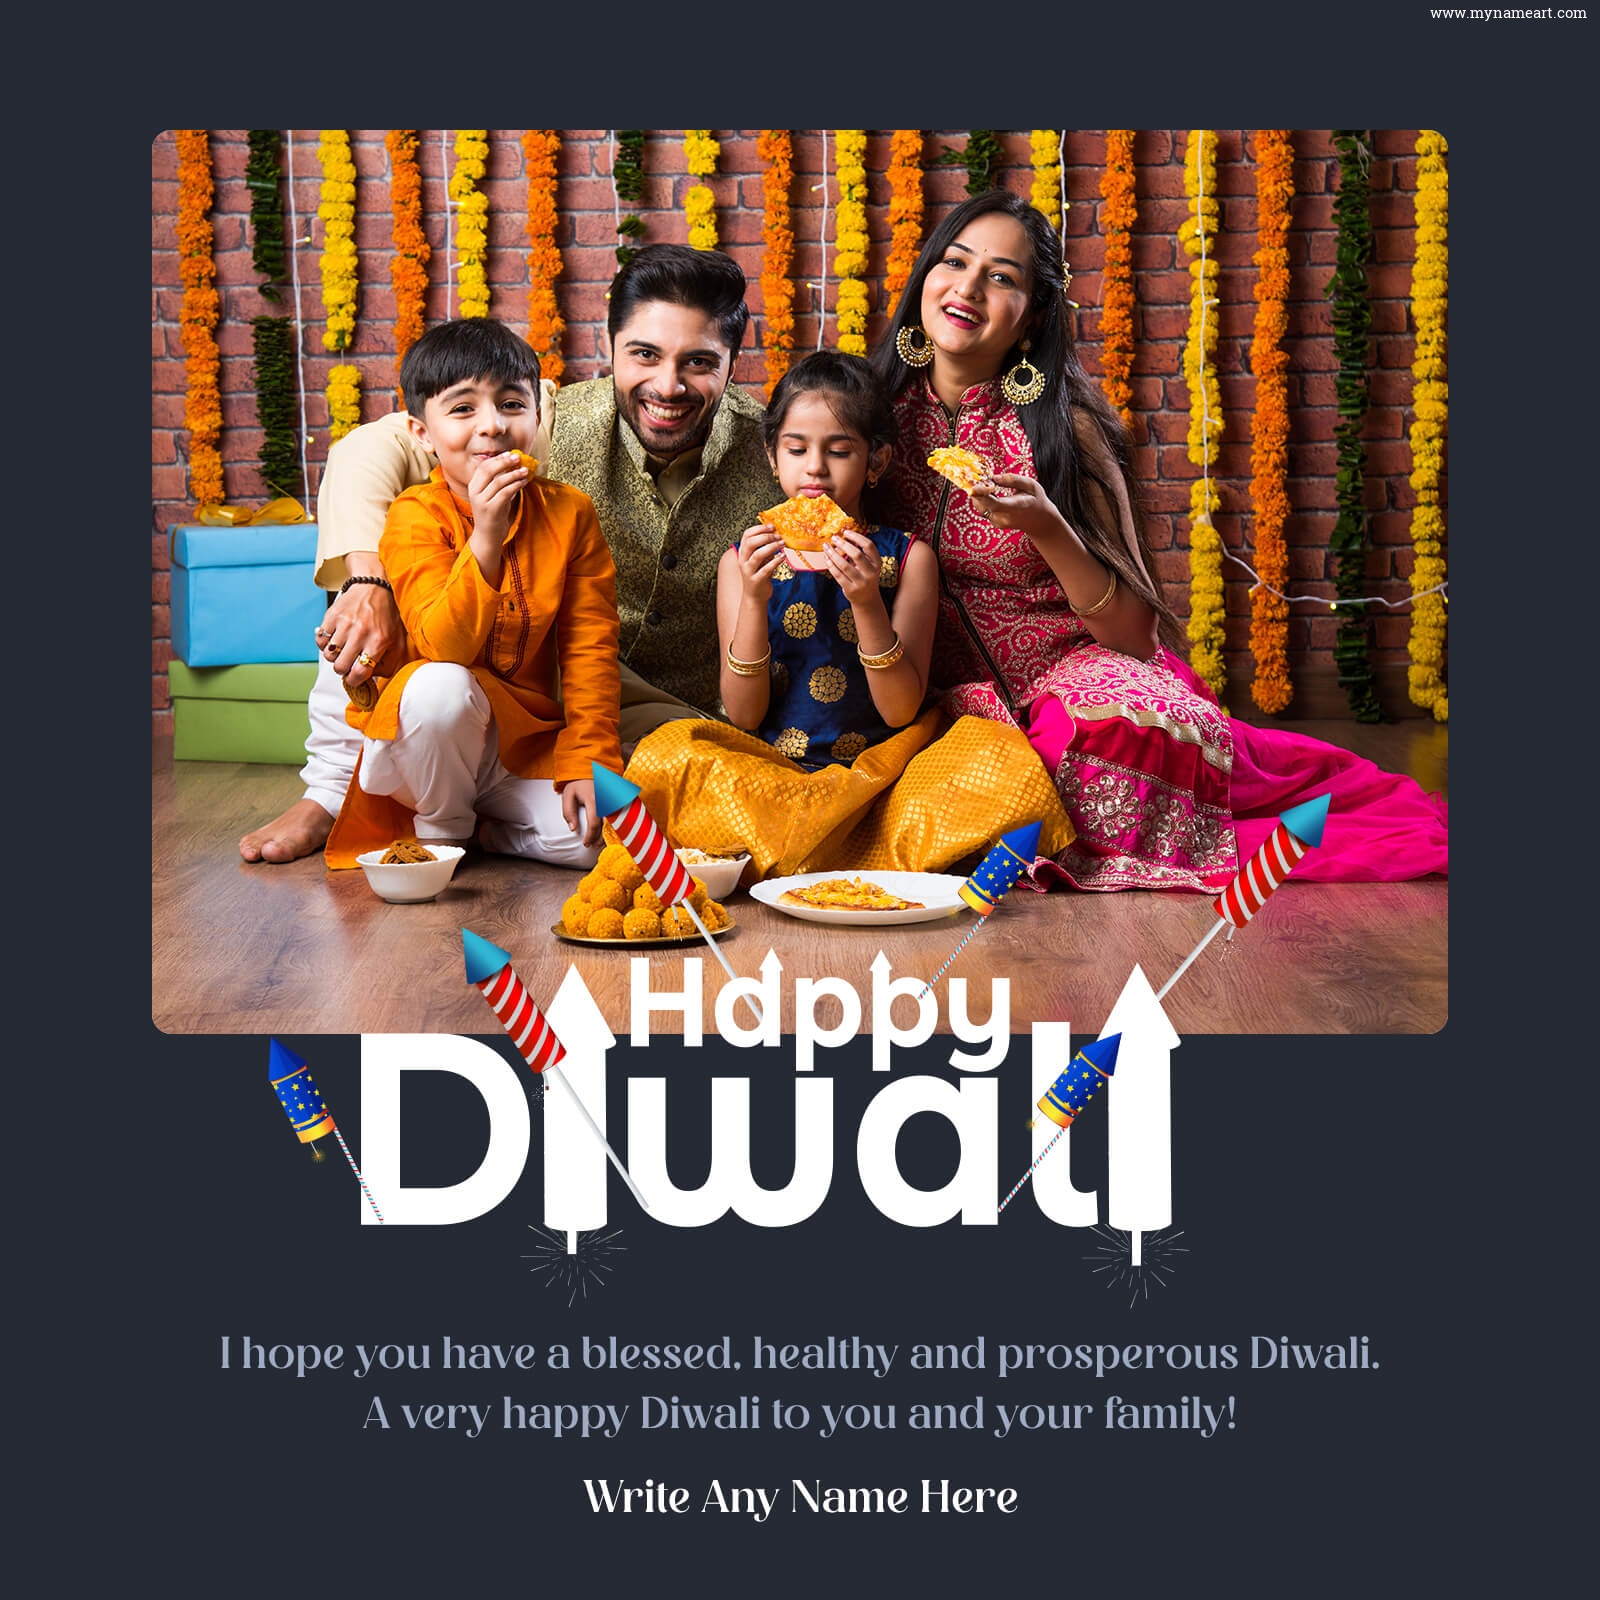 Personalize Your Diwali Greeting Card With Photos